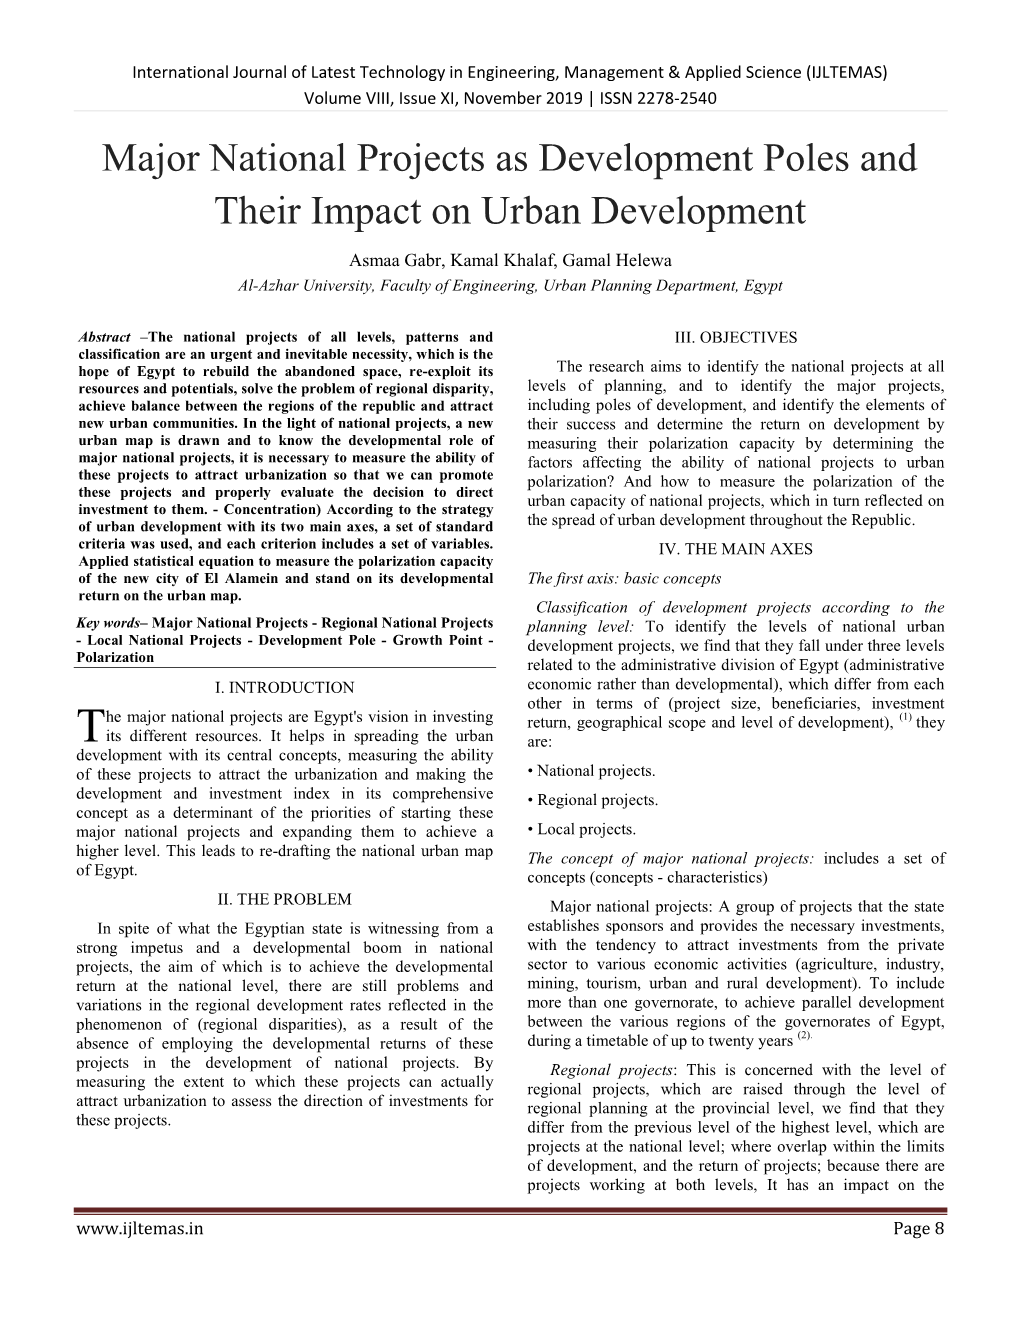 Major National Projects As Development Poles and Their Impact on Urban Development